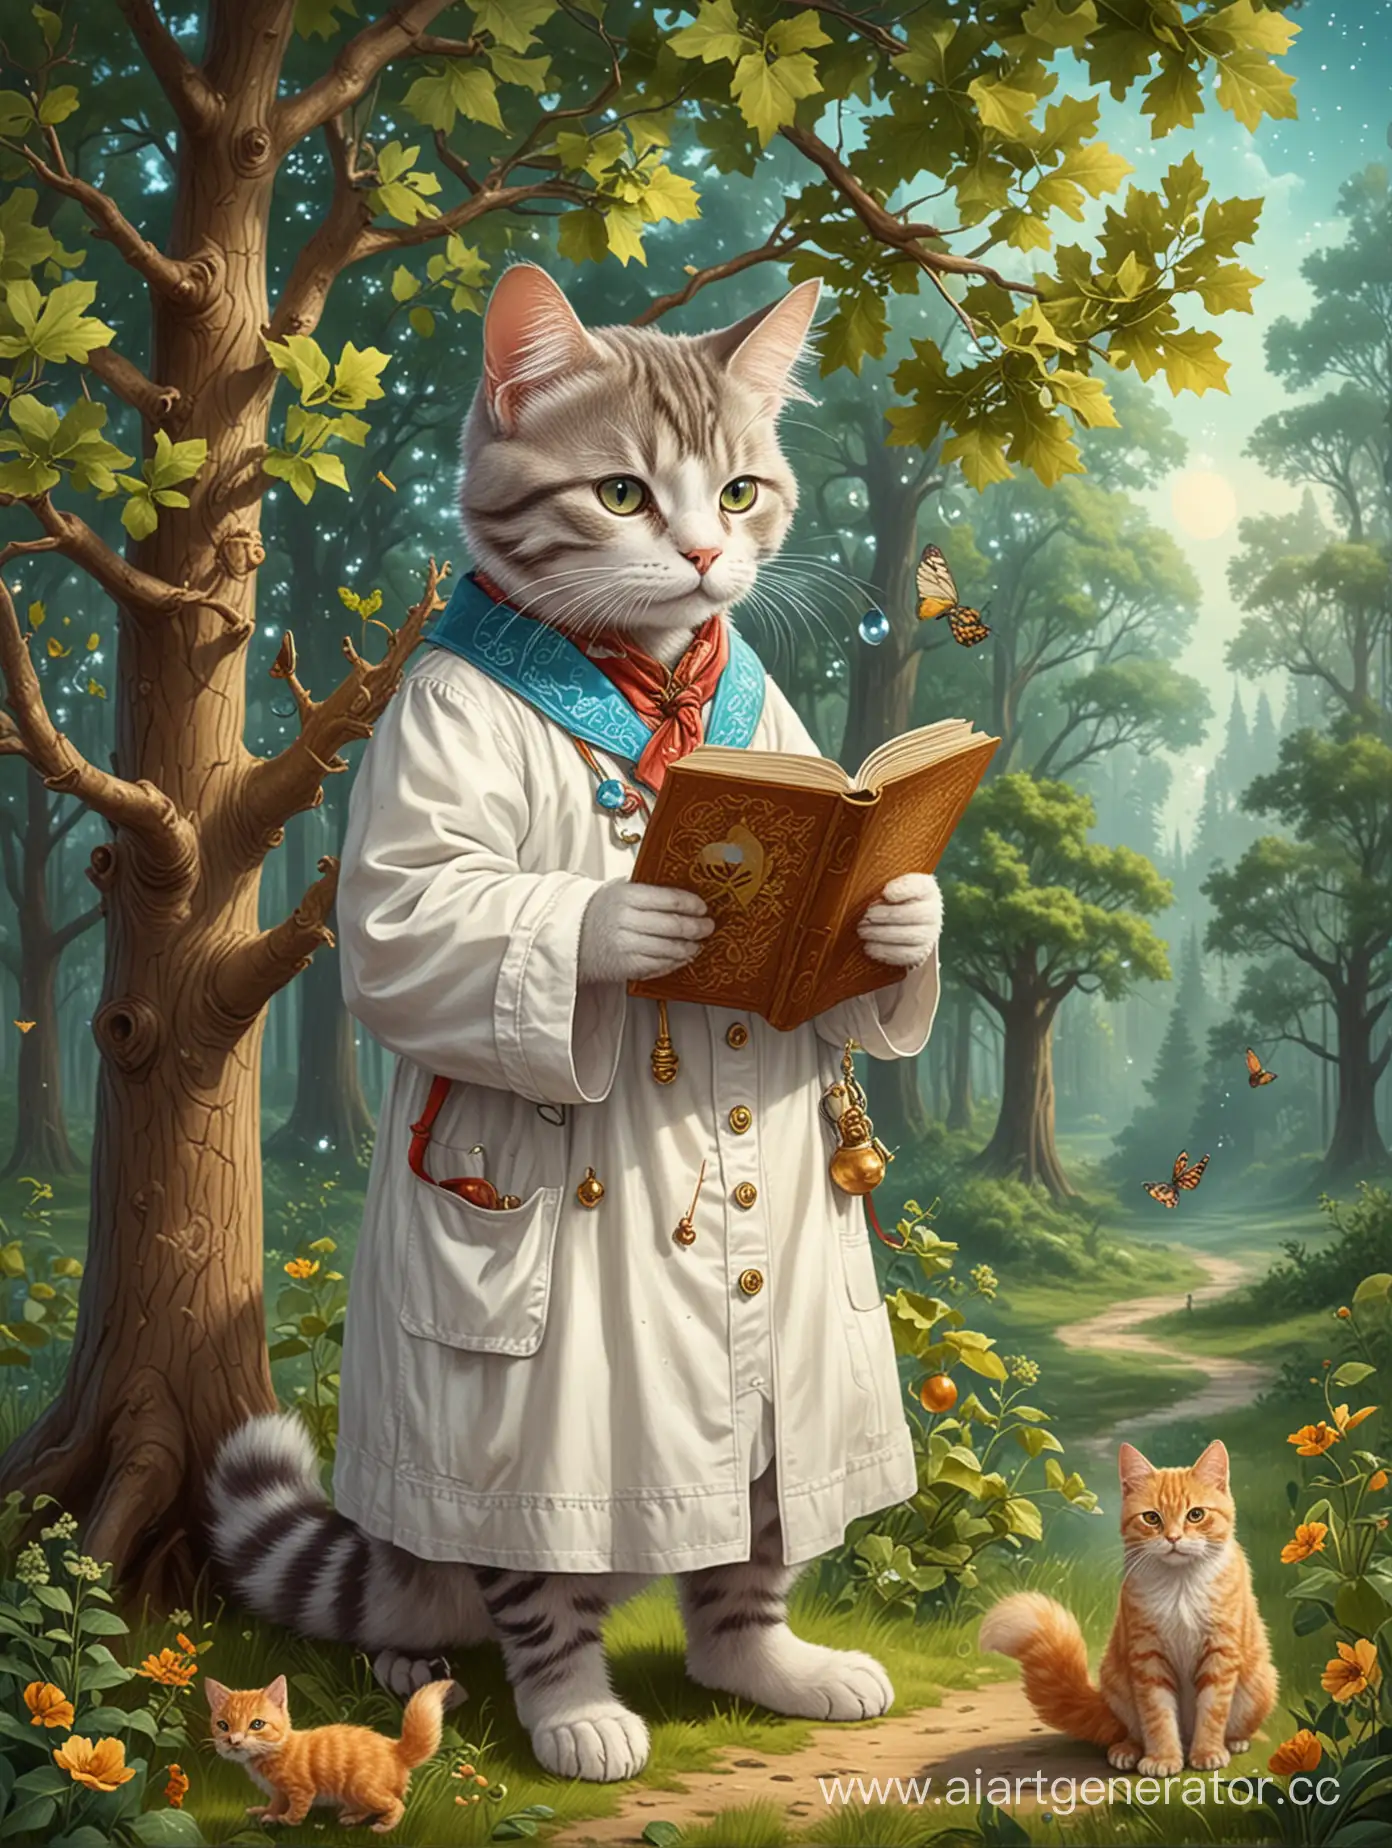 Feline-Scientist-Conducting-Experiments-Beneath-the-Mighty-Oak-Inspired-by-Russian-Fairy-Tales